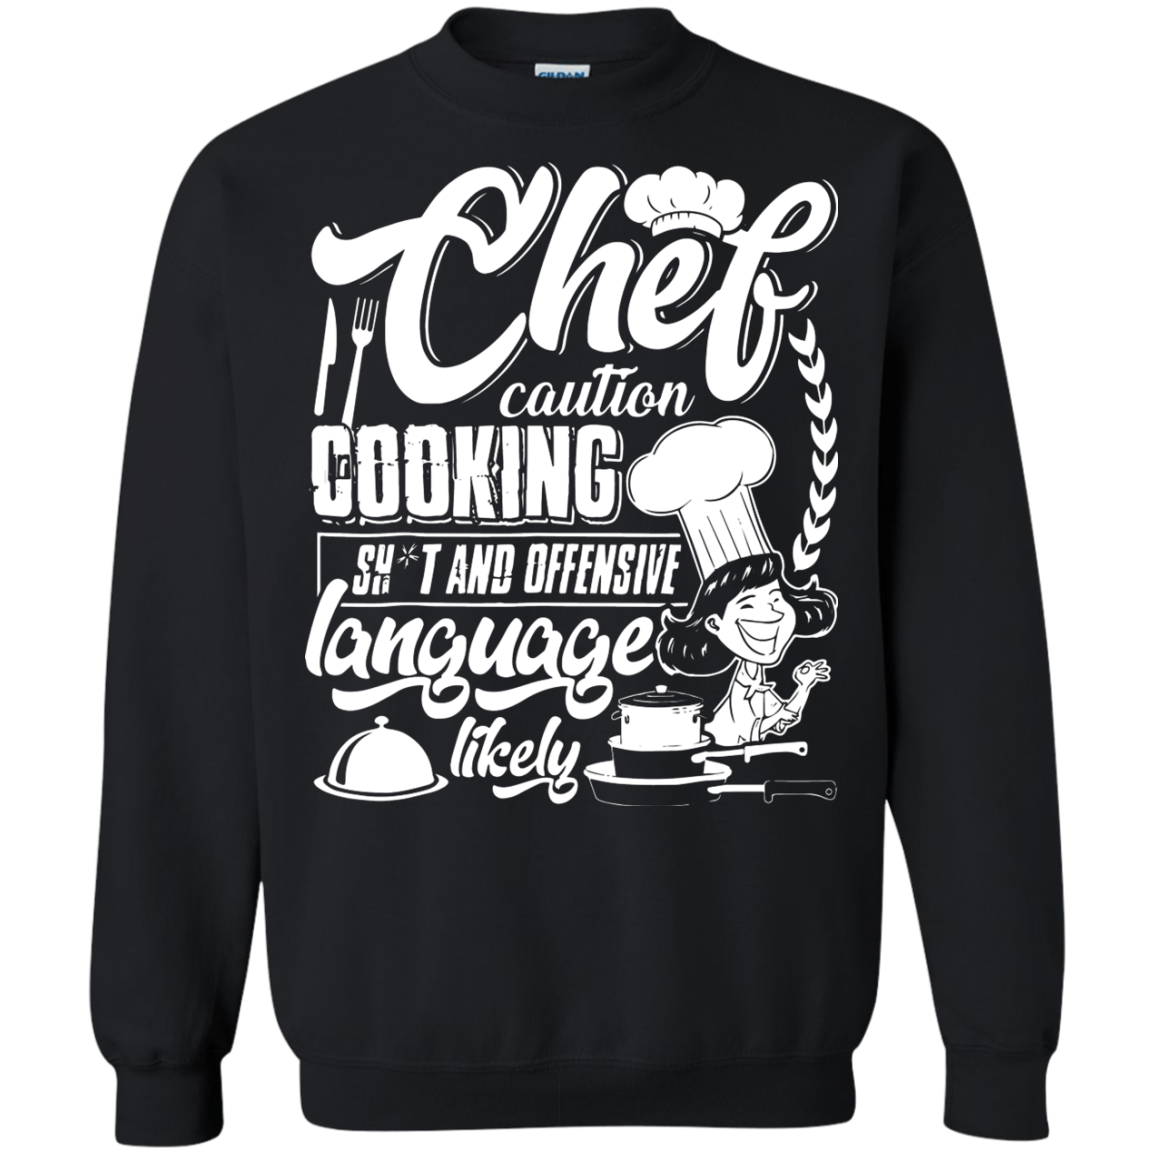 Cooking Makes Me Happy - Cool Chef Shirt 